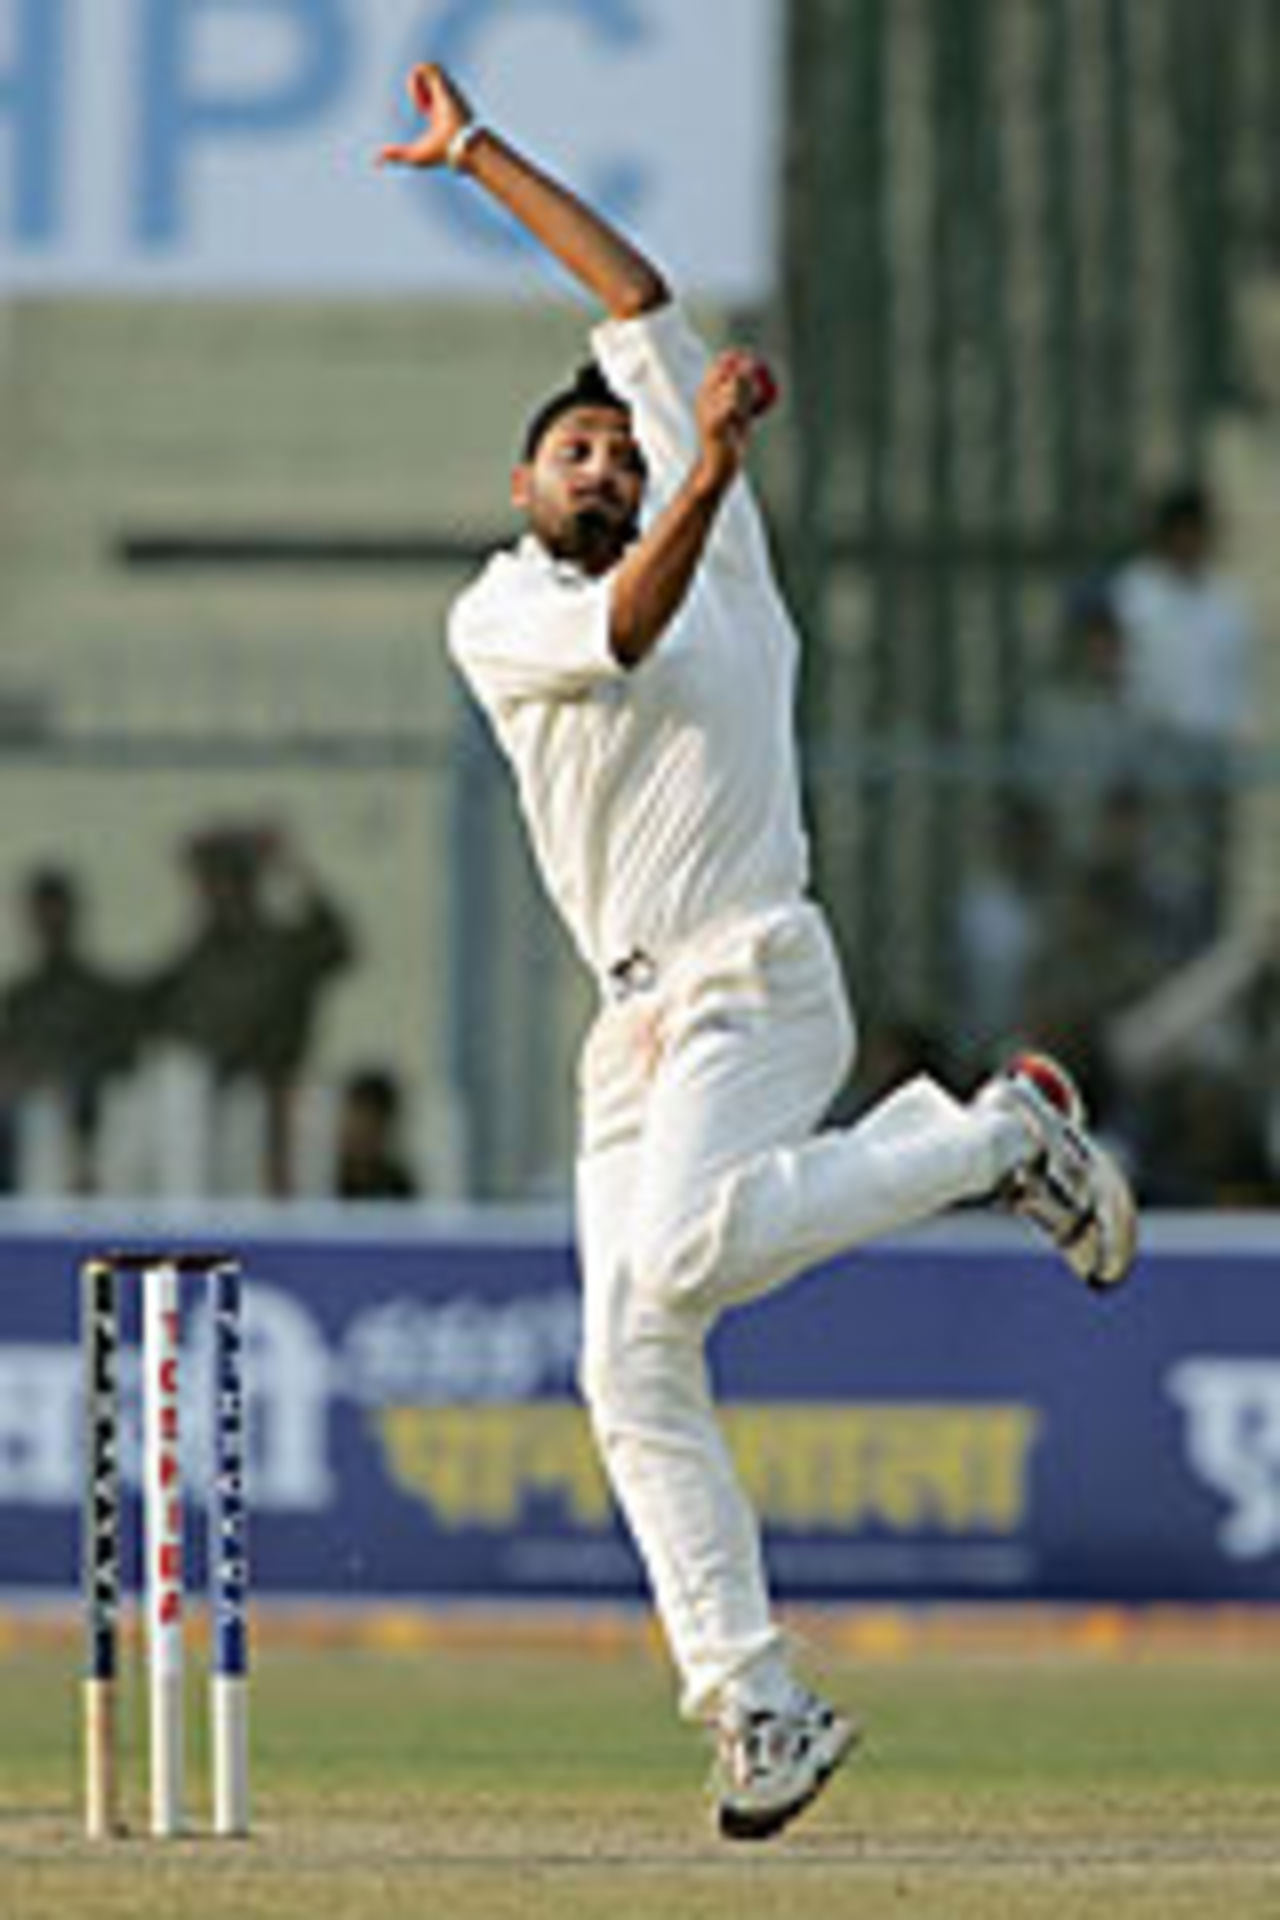 Harbhajan Singh bowling on the first day of the first Test against South Africa at Kanpur, November 20 2004